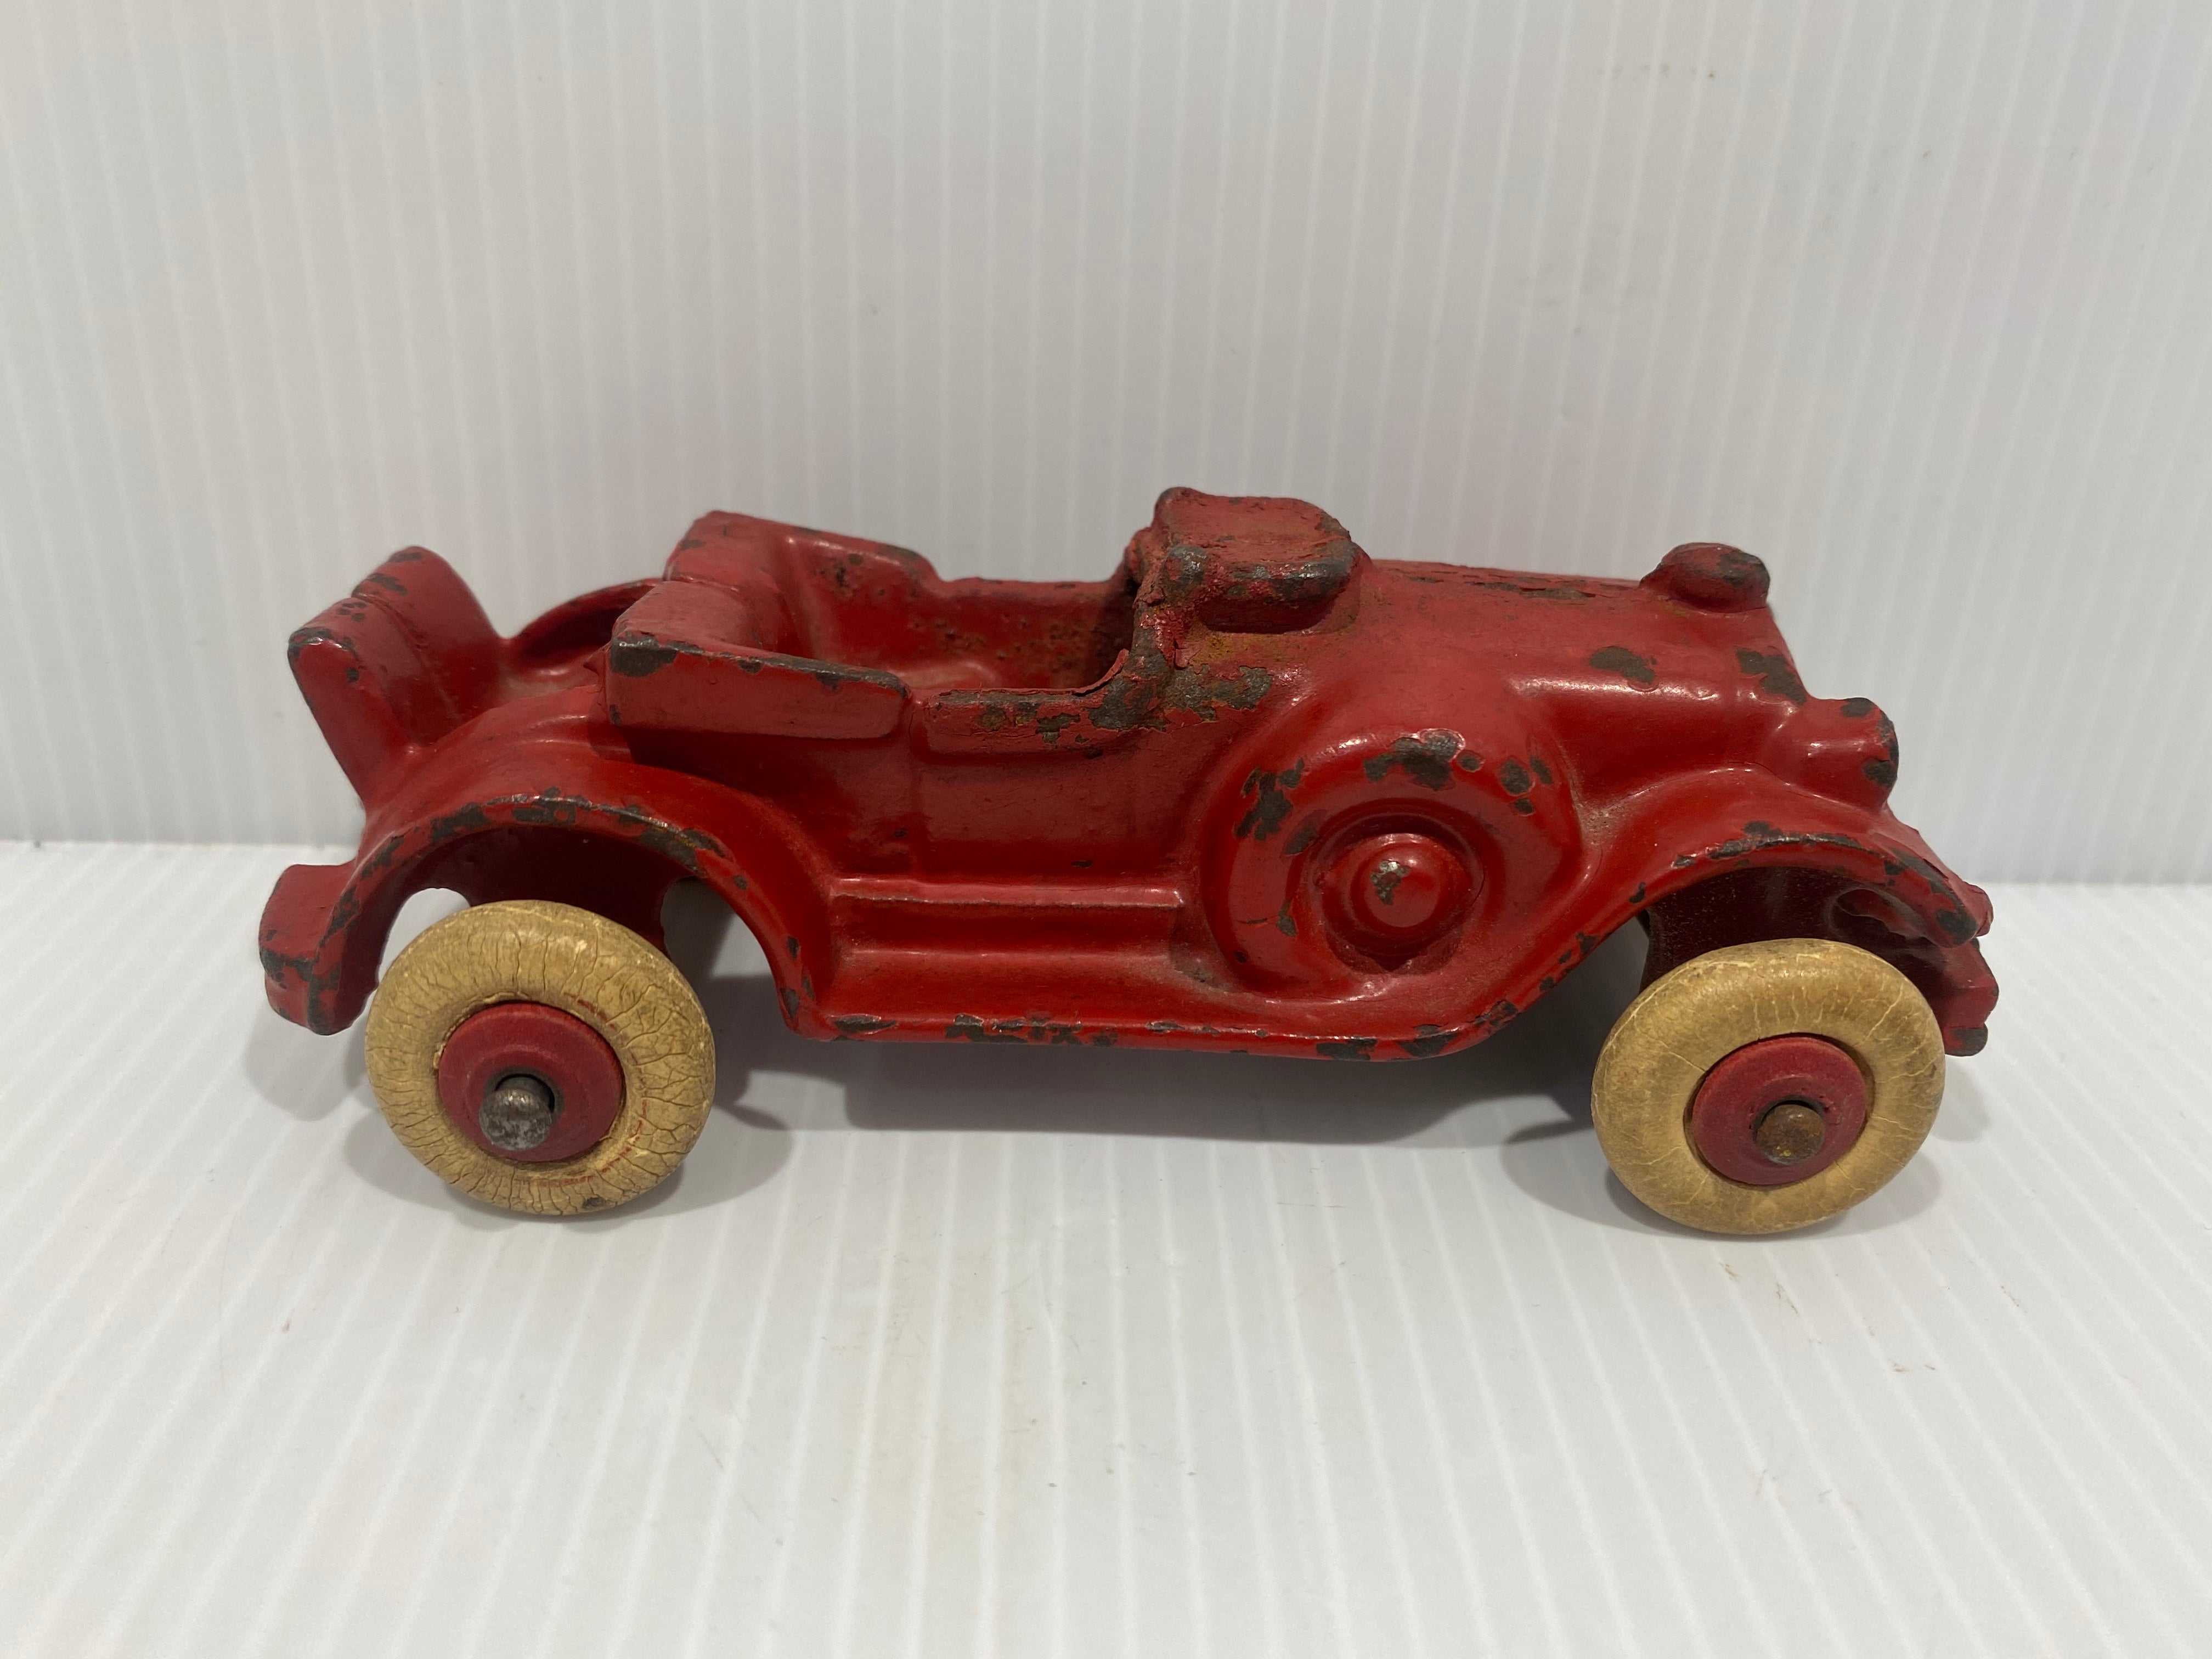 1920s cast iron Ragtop Roadster with rumble seat by Hubley in original paint.